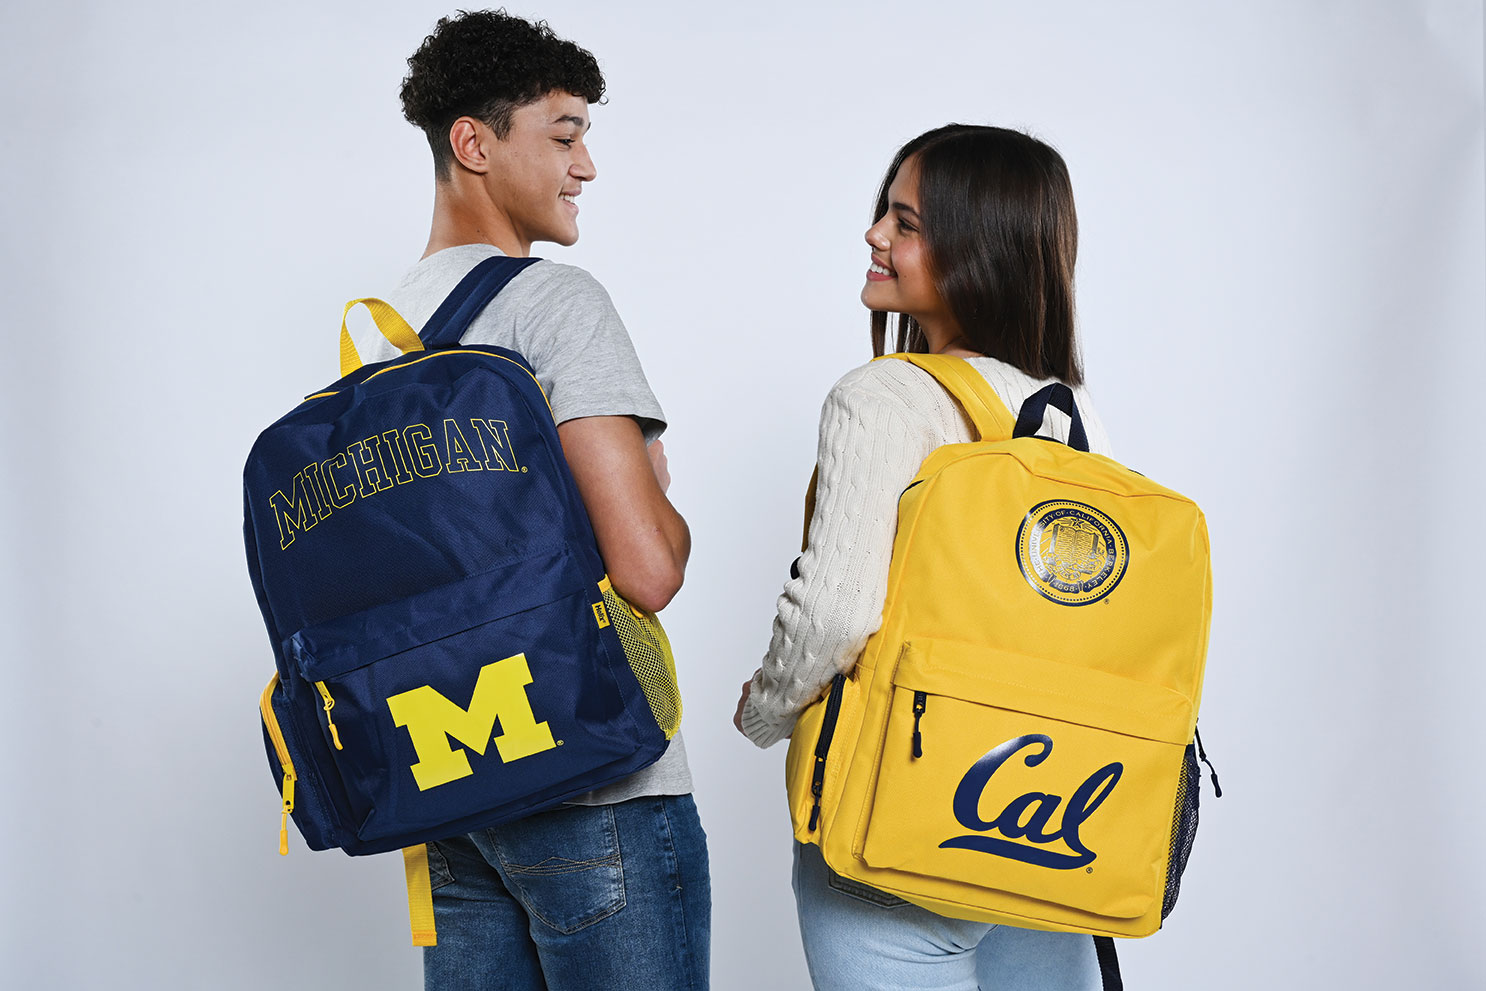 2 young people with Michegan and Cal backpacks